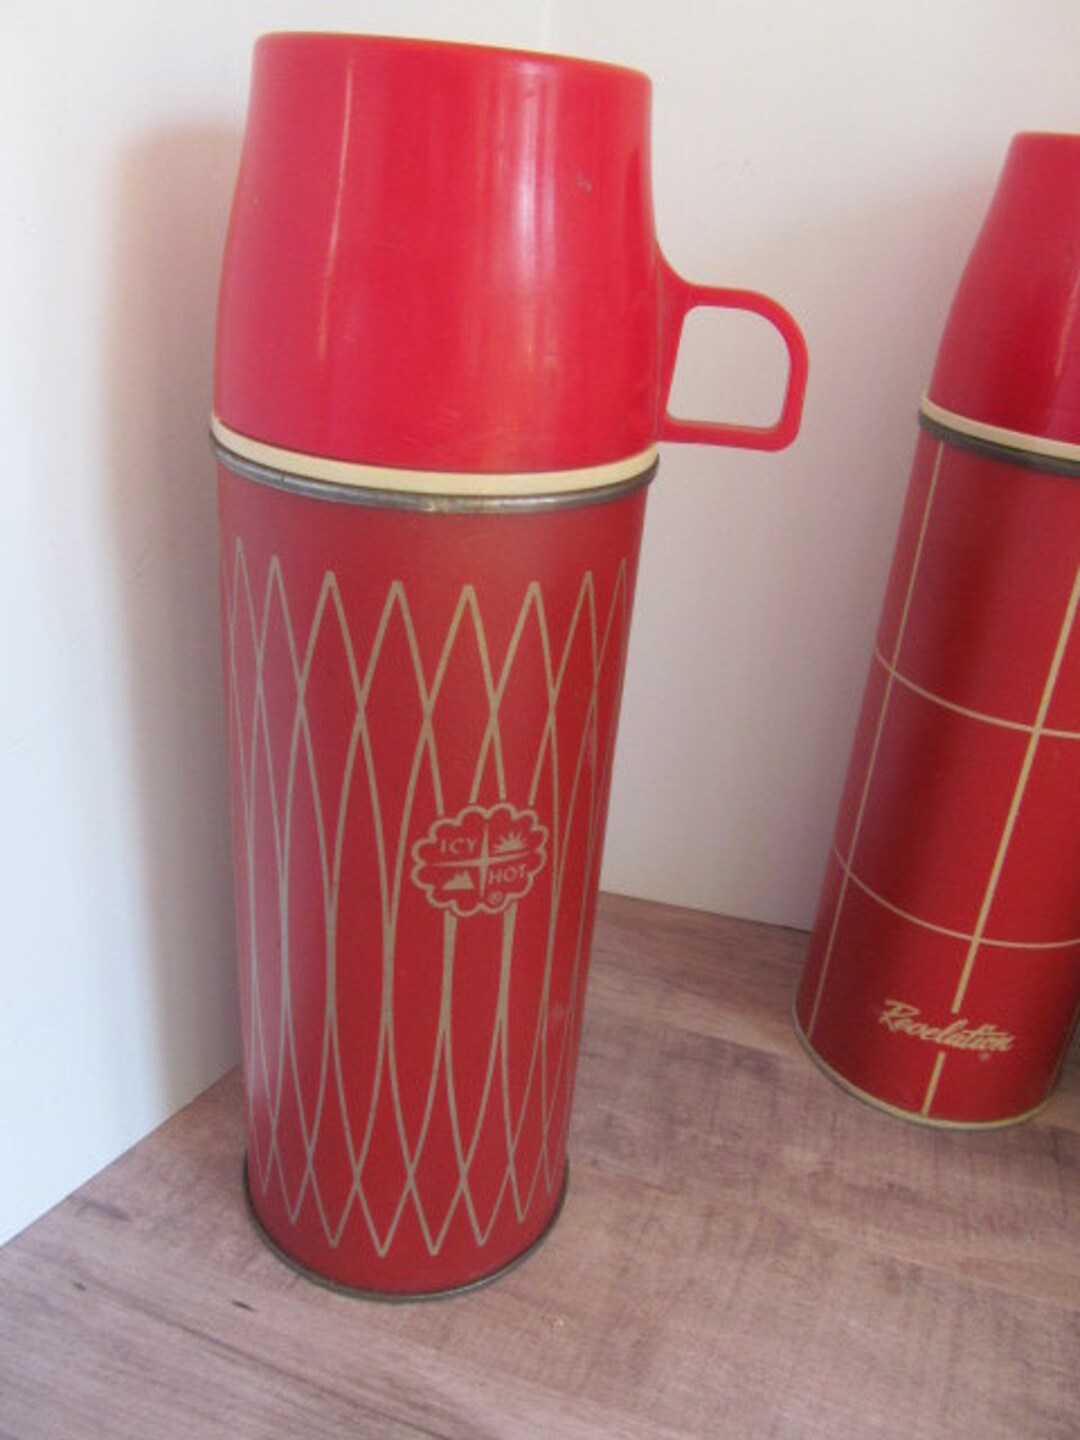 THERMOS Replacement Lid ~MUG ~CUP ~Red ~King ~Tall Size ~ORIGINAL CLEAN